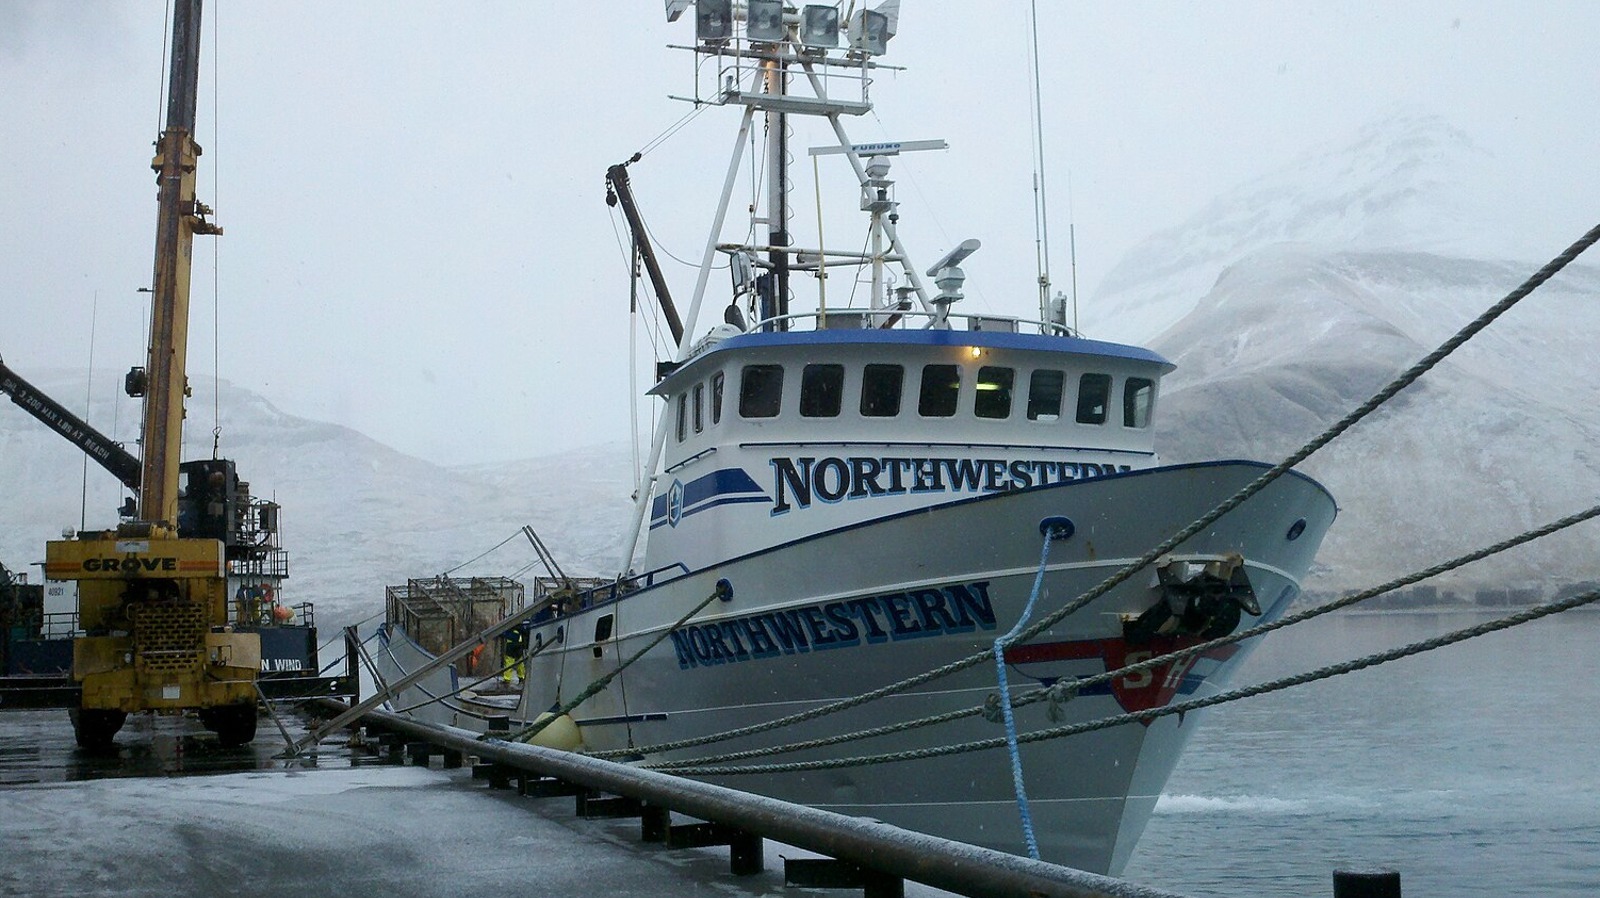 Deadliest Catch: What Happened To The Northwestern? – Grunge